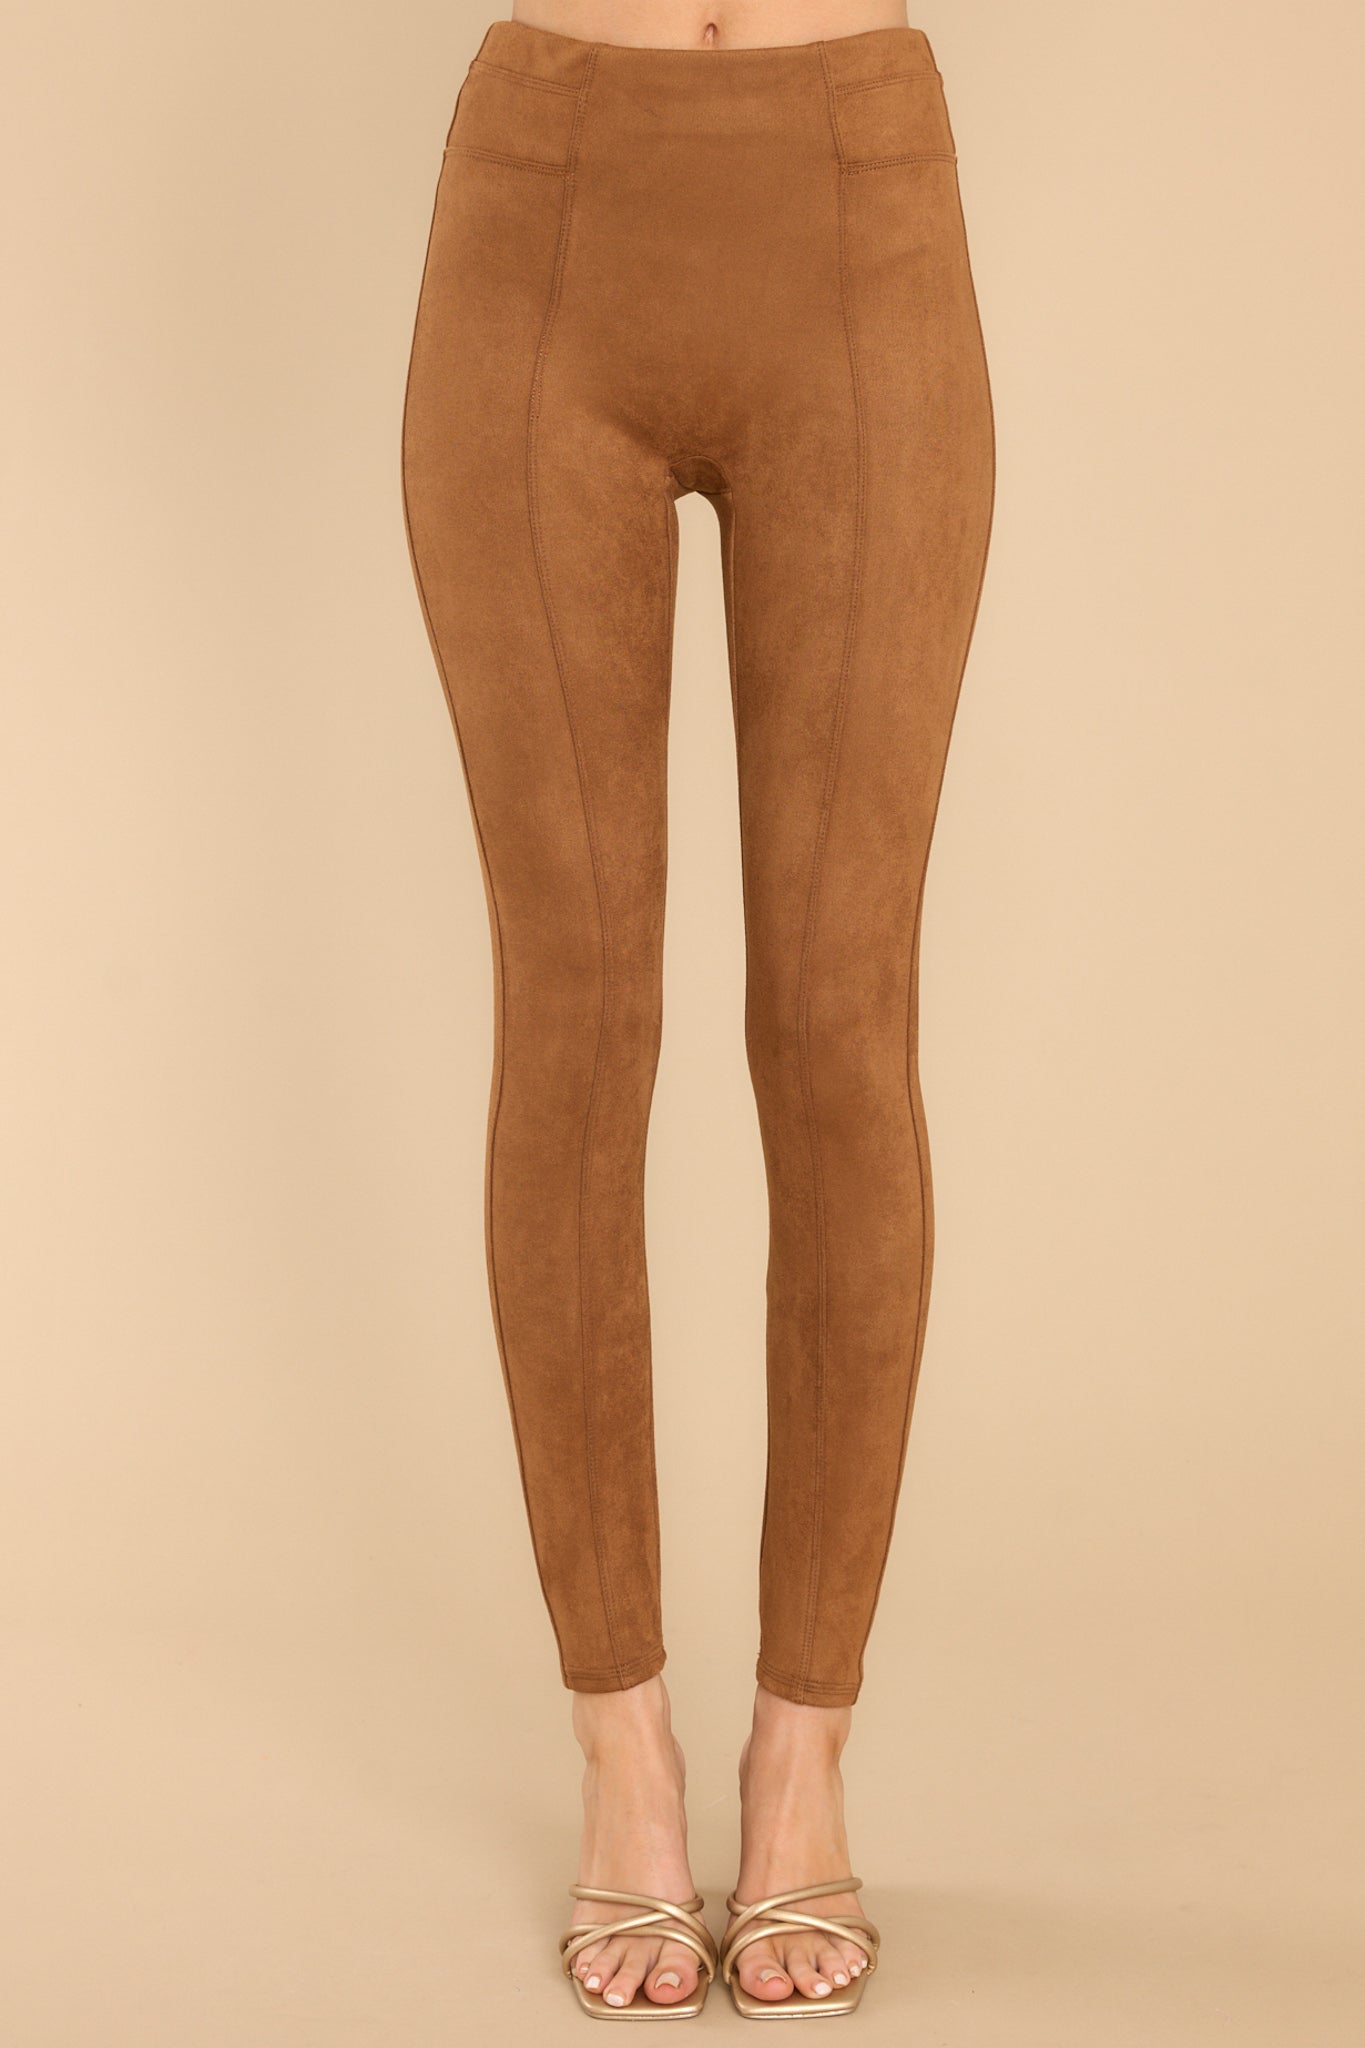 NWT SPANX 20322R Faux Suede Leggings in Rich Caramel Seamed Pull-on Pants S